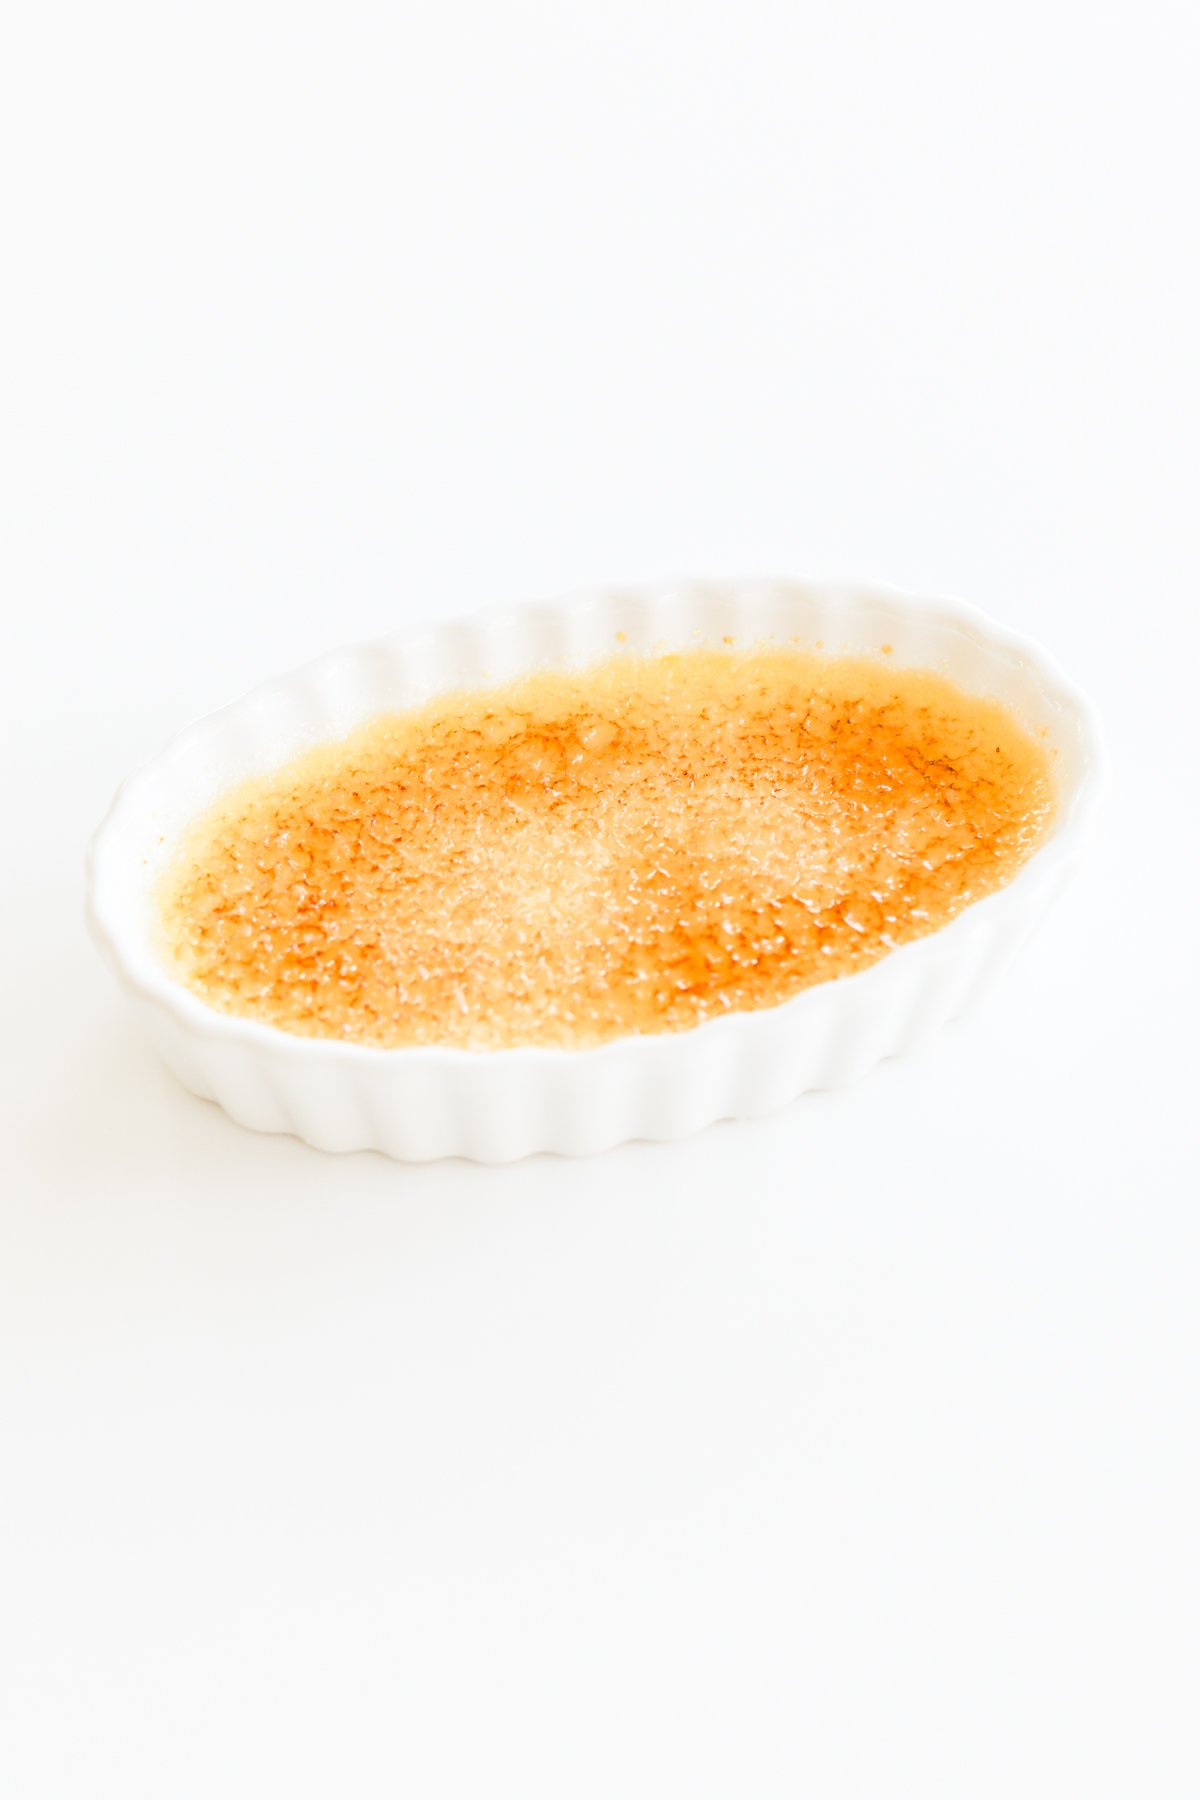 An easy creme brulee served in a bowl on a white surface.